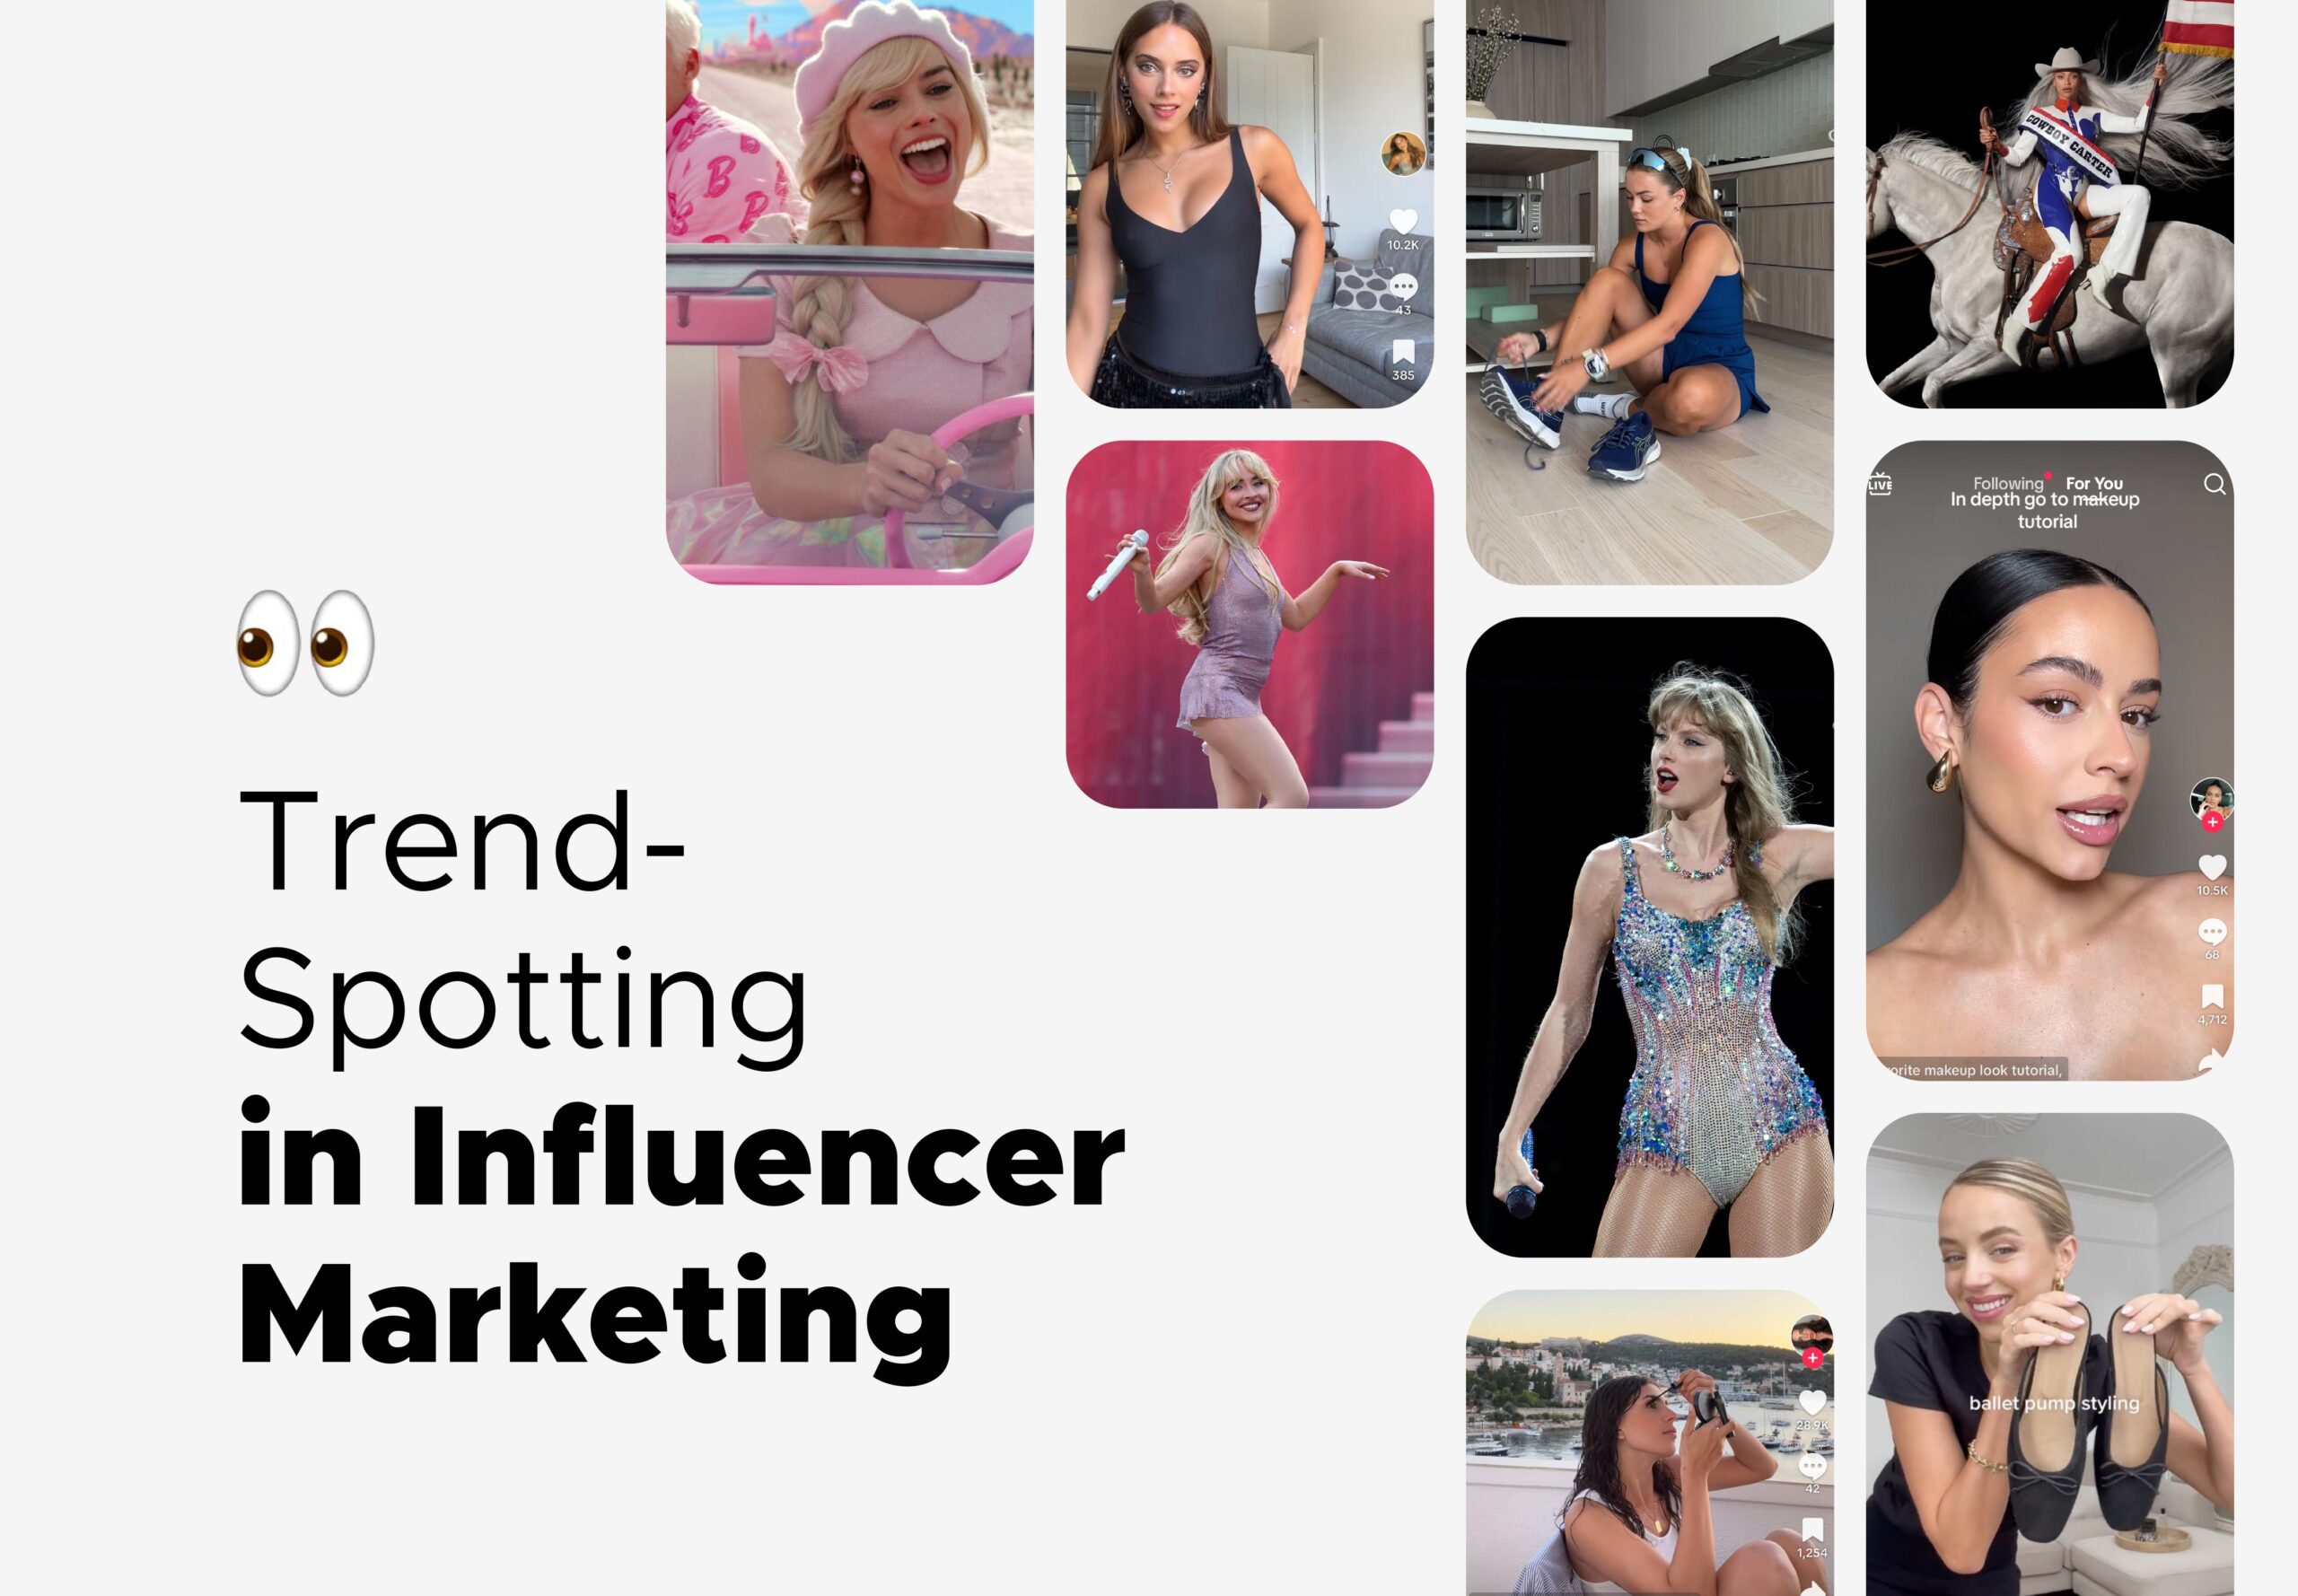 A grey background with a bunch of small photos on the right side and the headline "Trend-Spotting in Influencer Marketing"